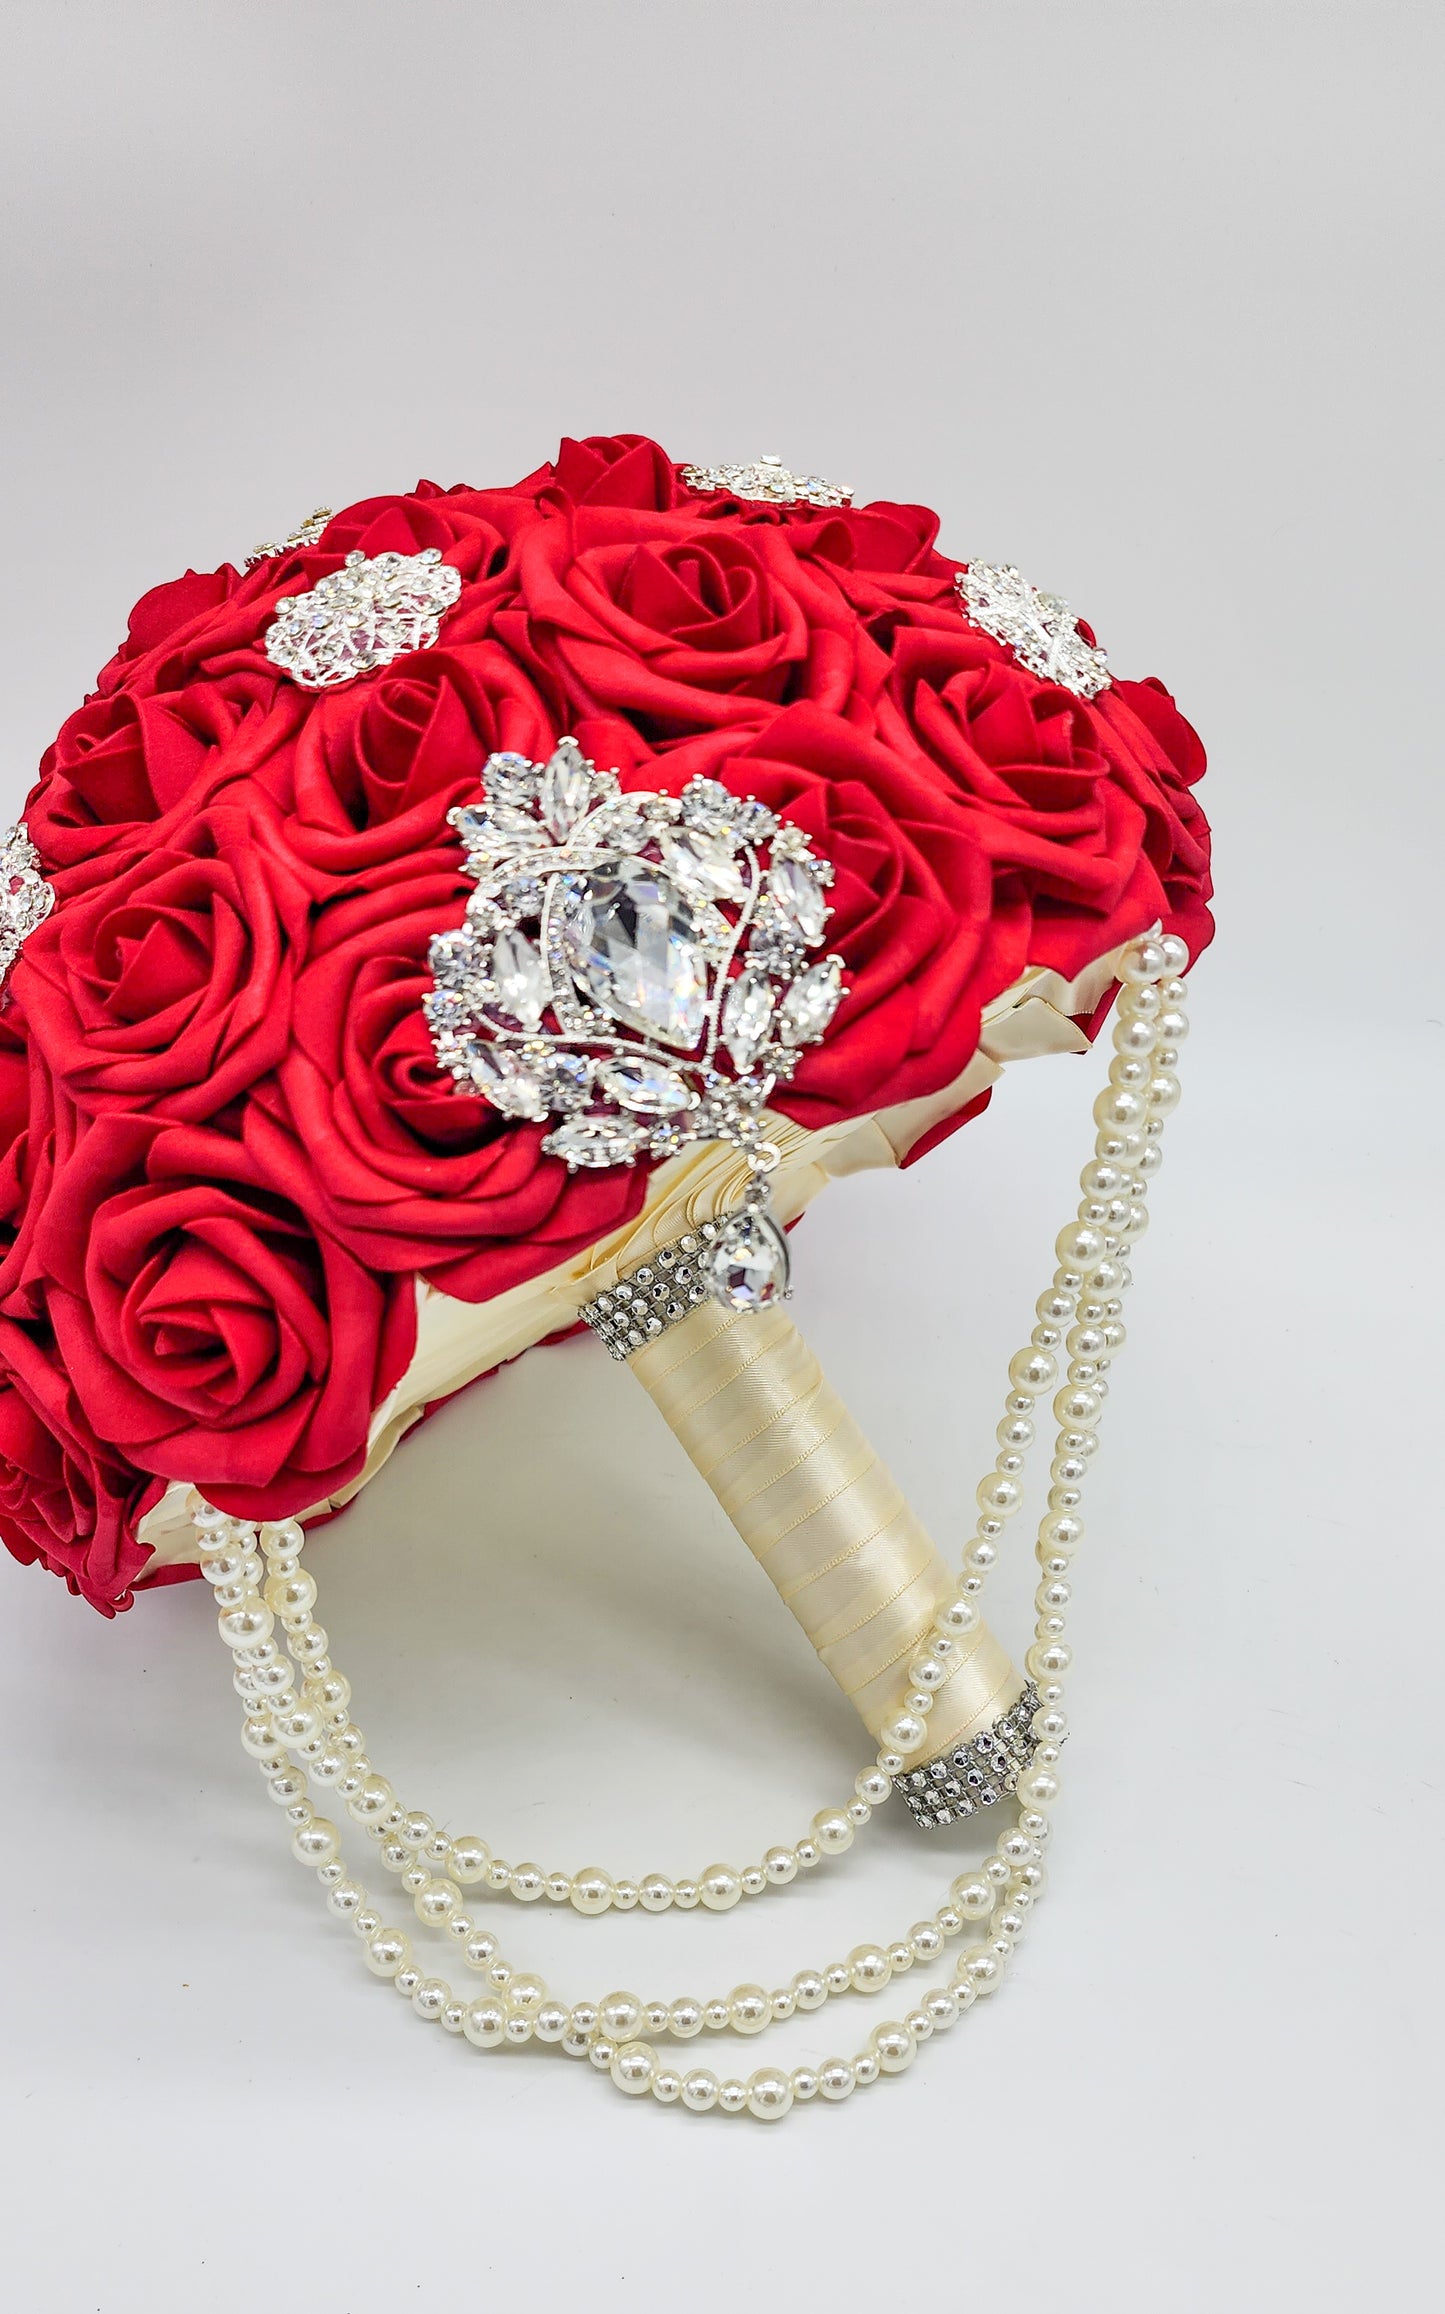 Red and Ivory Bridal Bouquet With Cascading Pearls